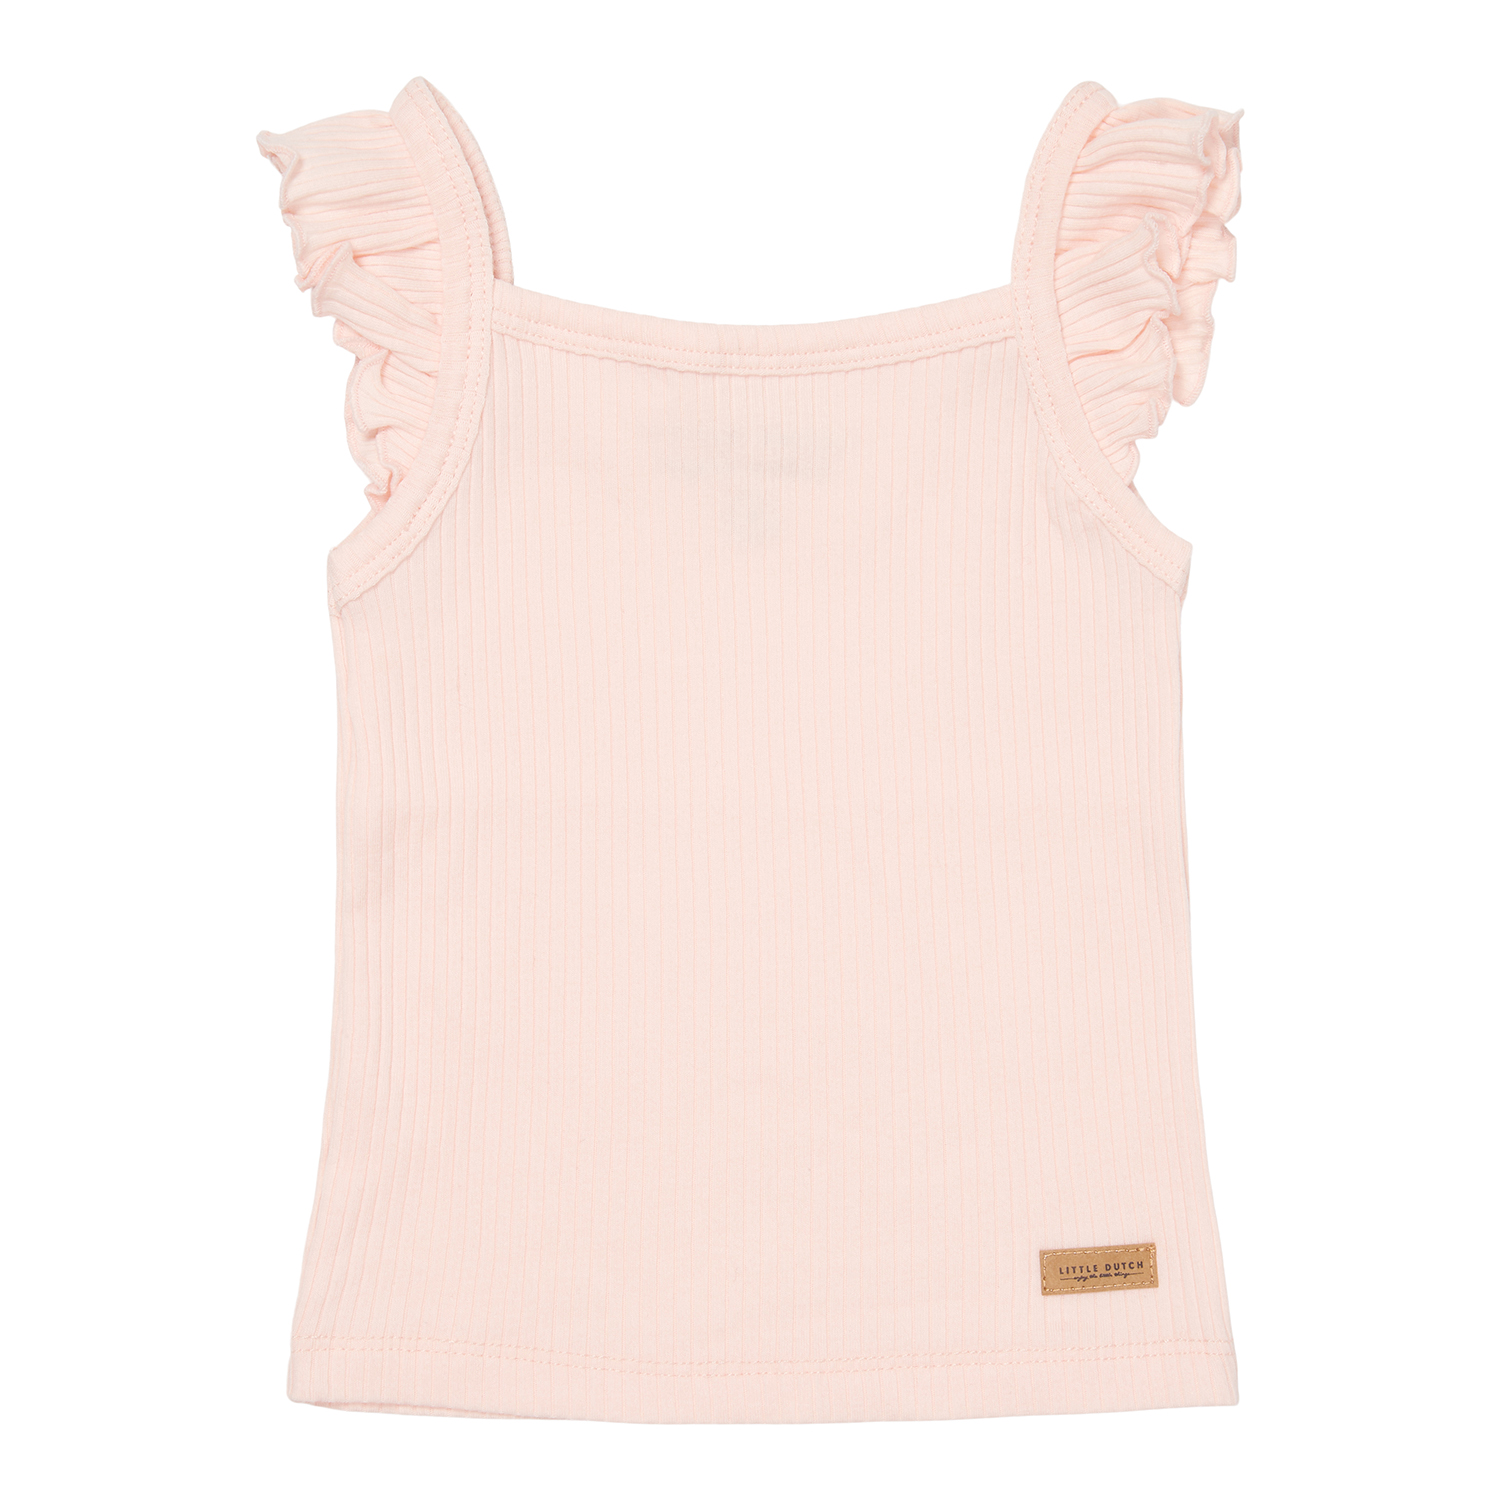 Top mit Volants Rippe Pure soft pink (Gr. 74)